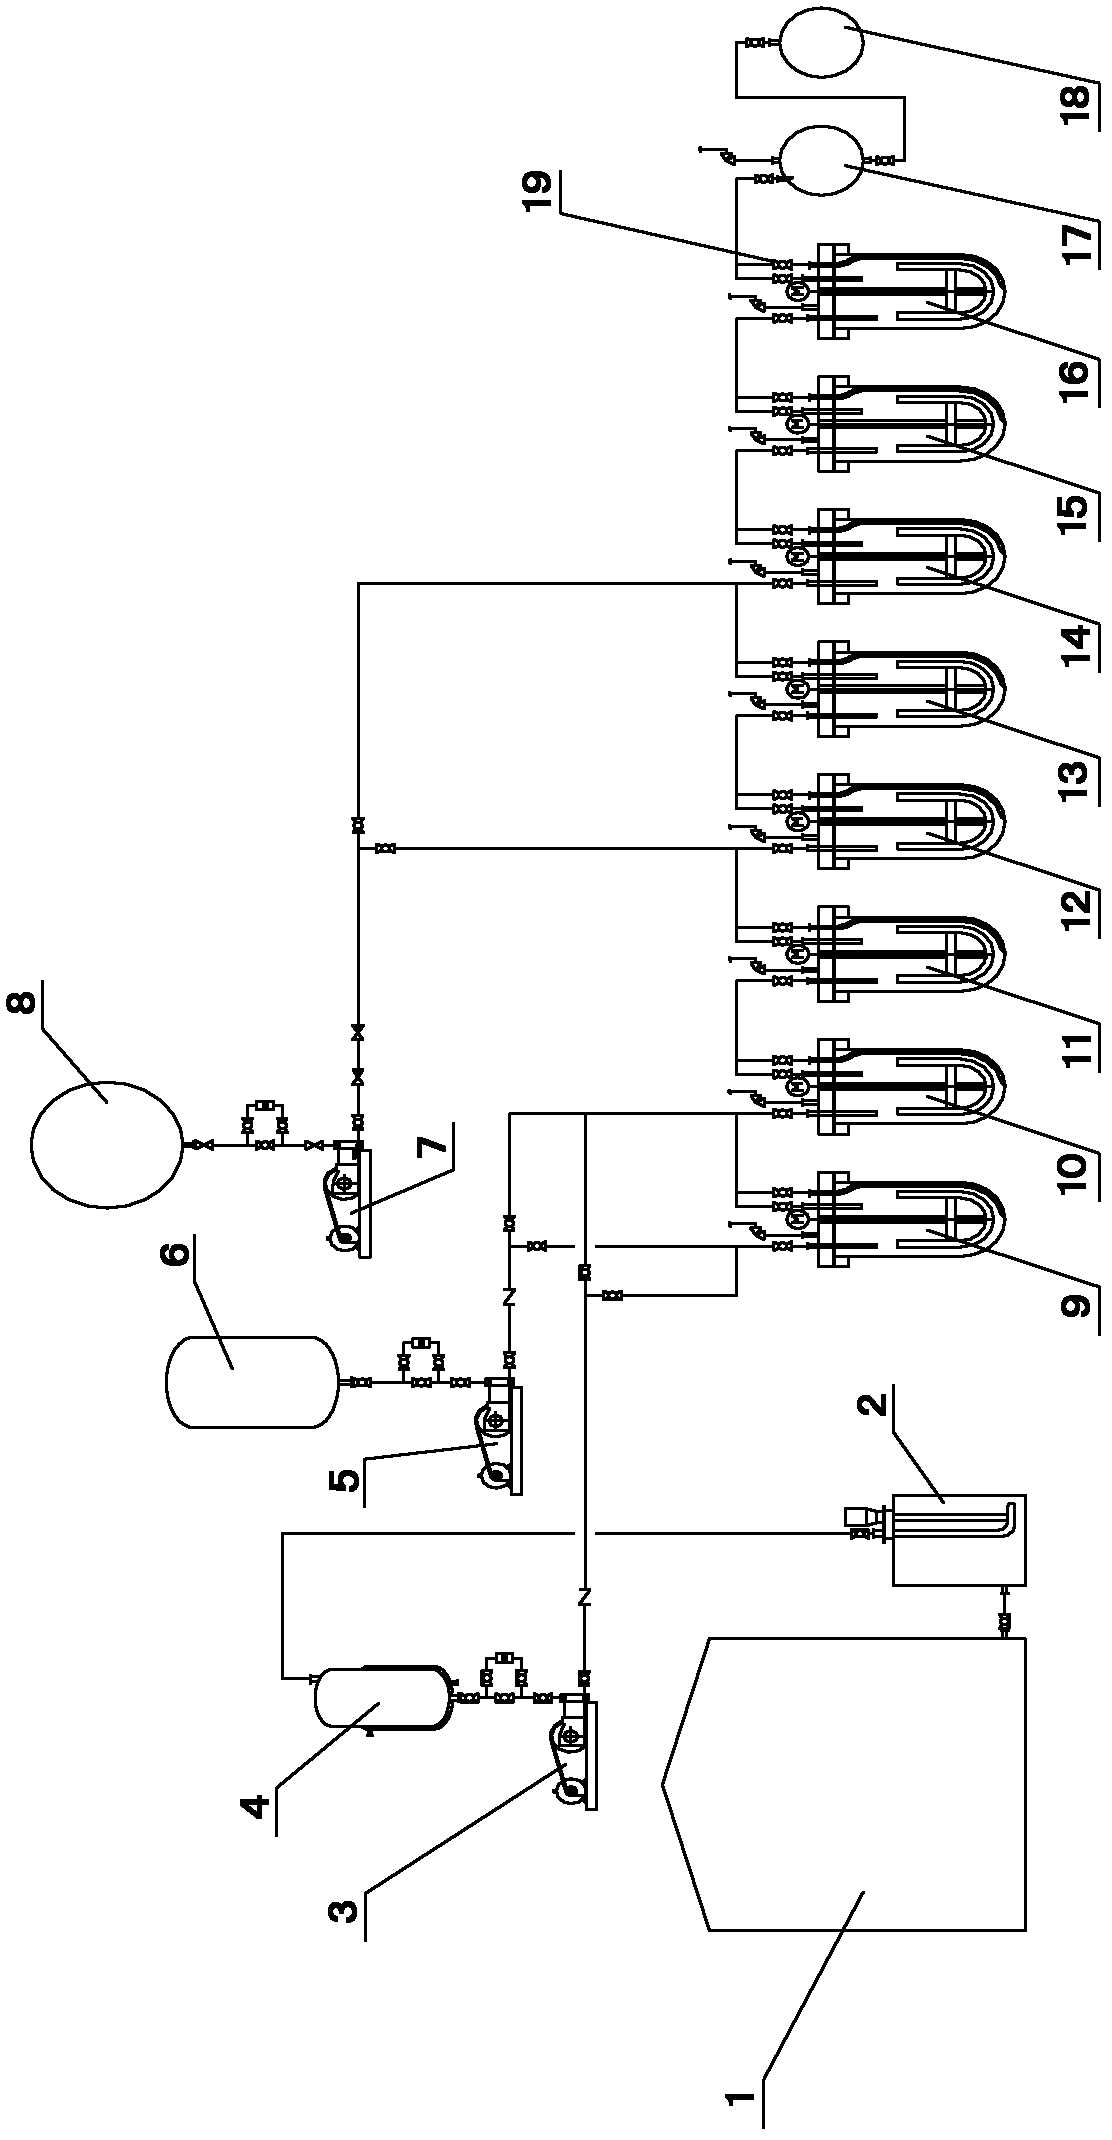 Method for producing o-nitroaniline by multiple series-connected kettles